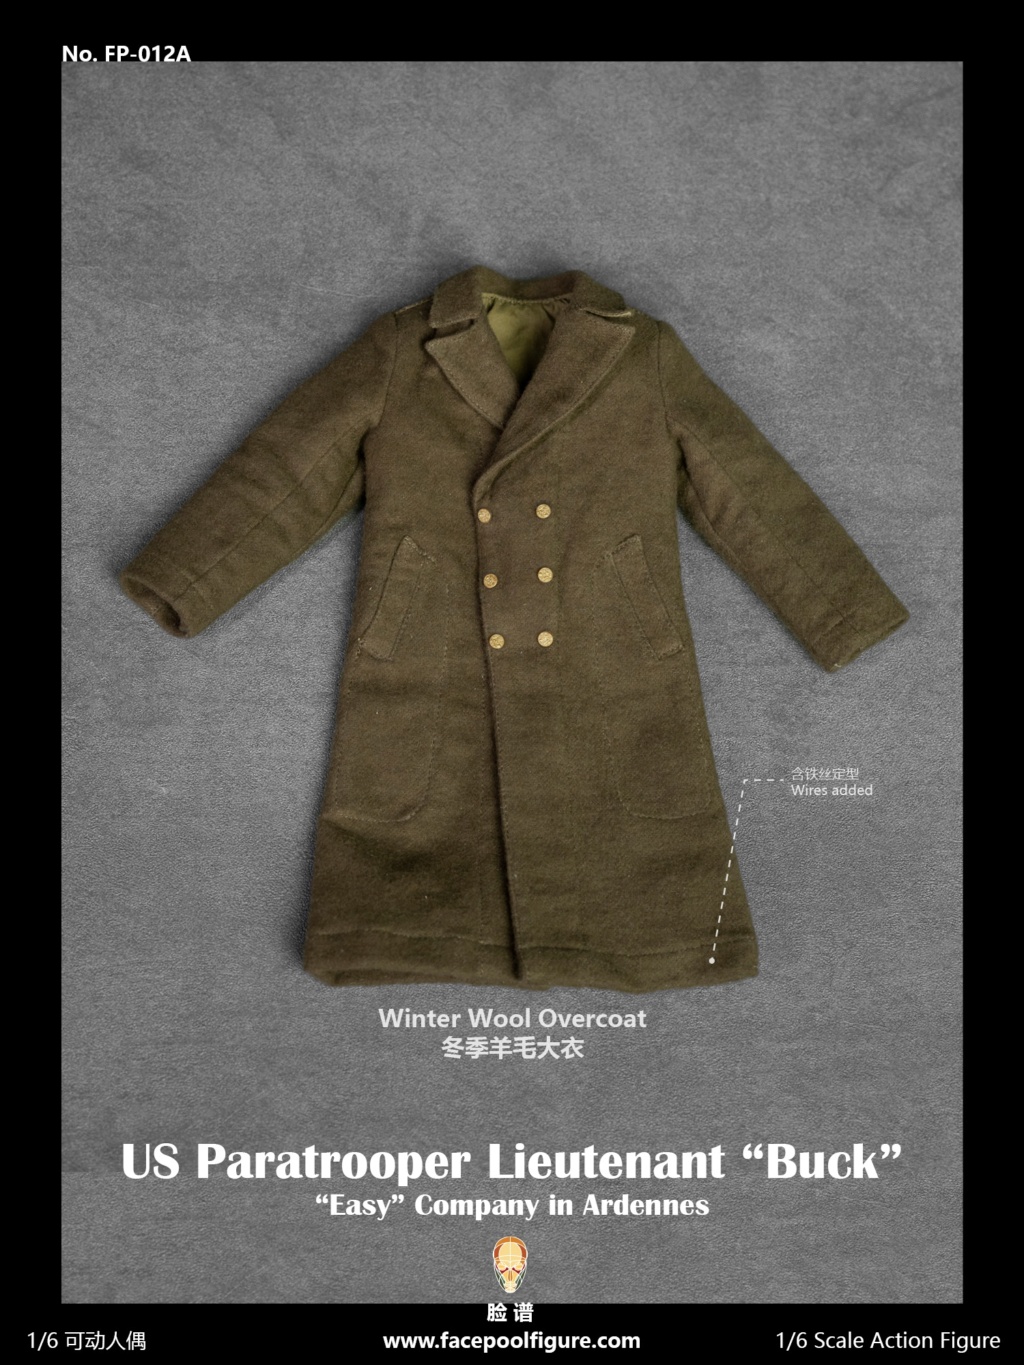 USParatrooper - NEW PRODUCT: Facepool: 1/6 Scale US Paratrooper Lieutenant “Buck” (FP012A & B) (2 versions) 10142910